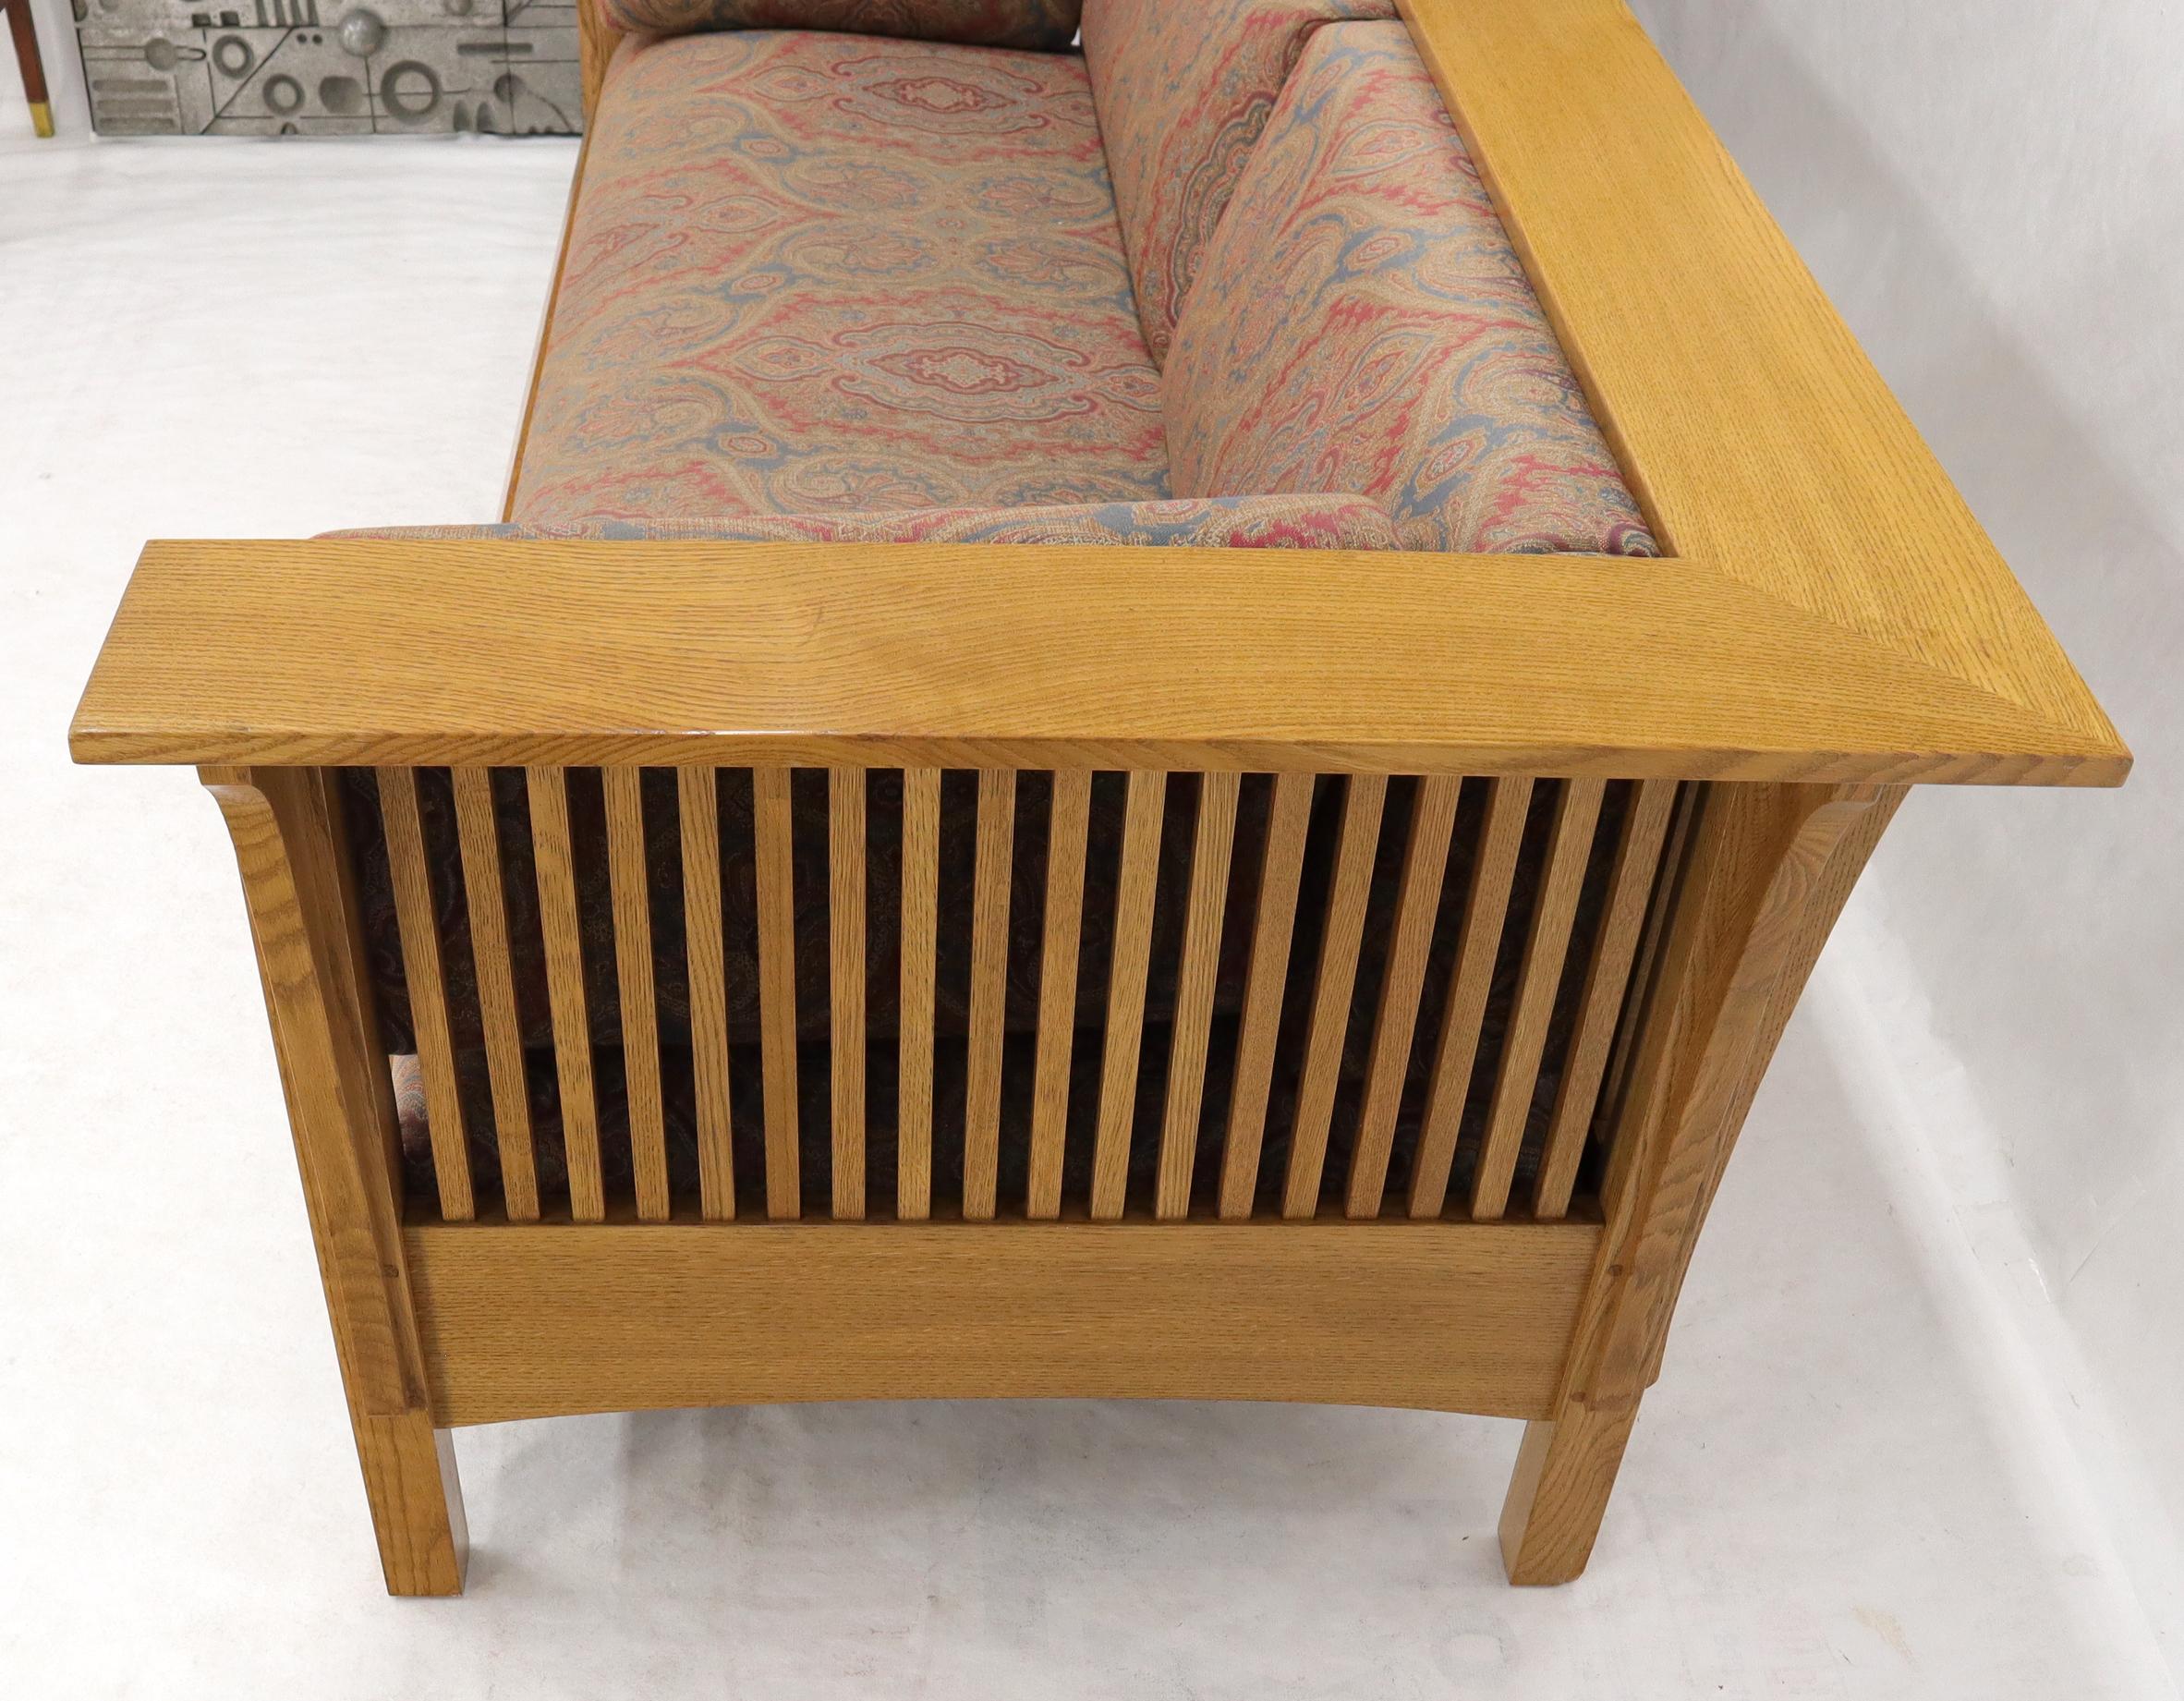 Arts & Crafts mission oak sofa daybed by Stickley.